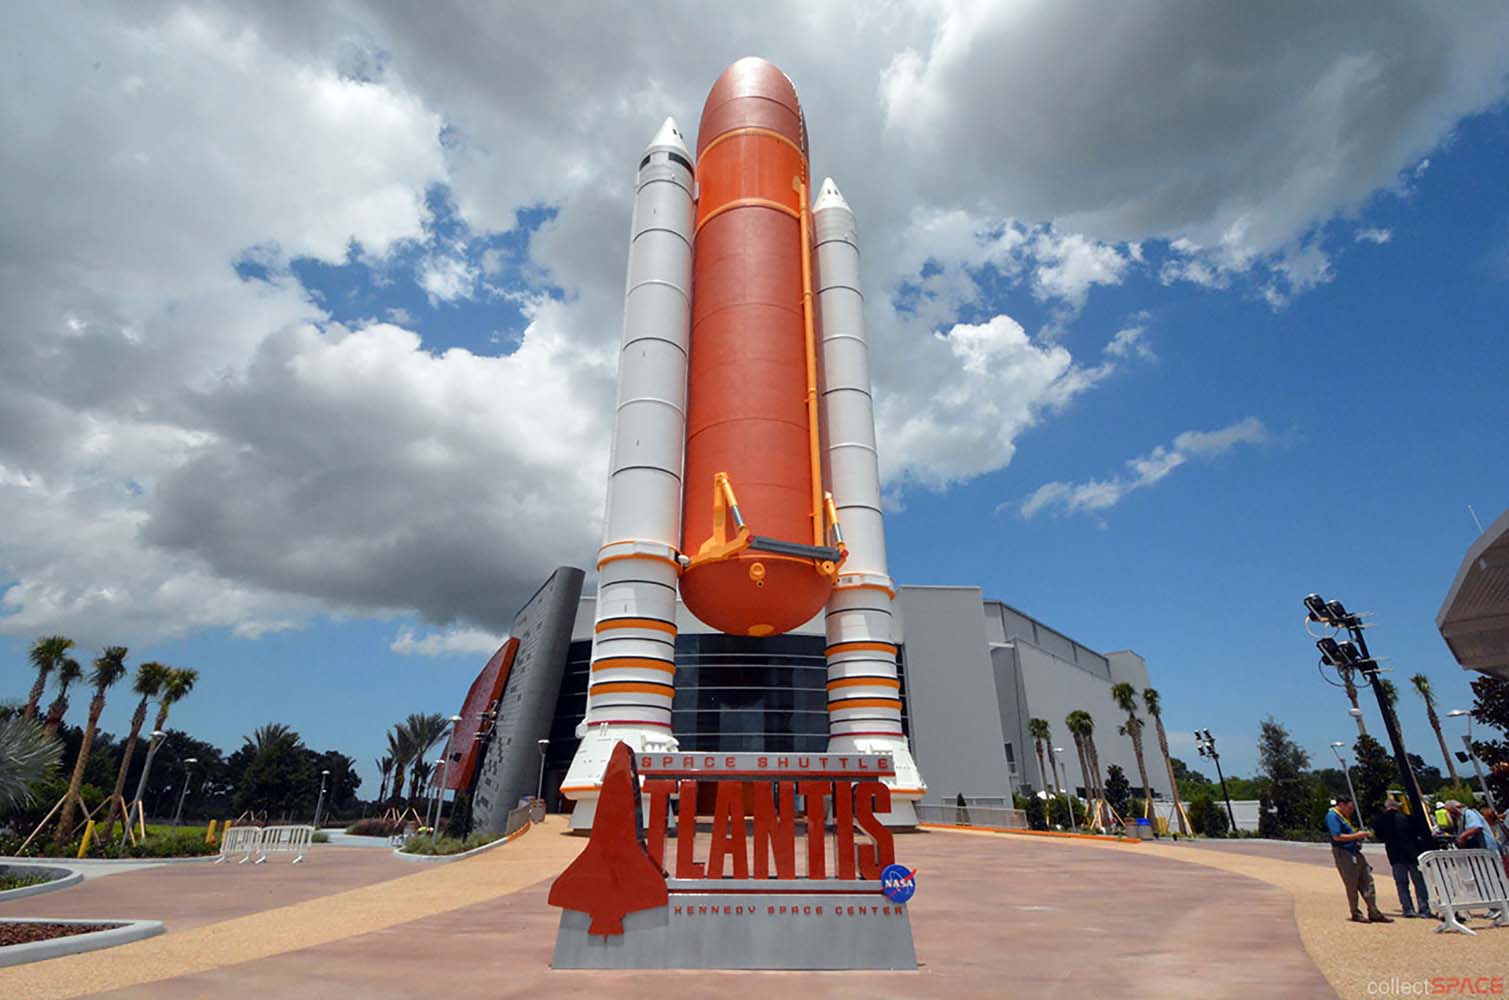 Exterior photo showing Space Shuttle Atlantis attractions at Kennedy Space Center Visitor Complex.